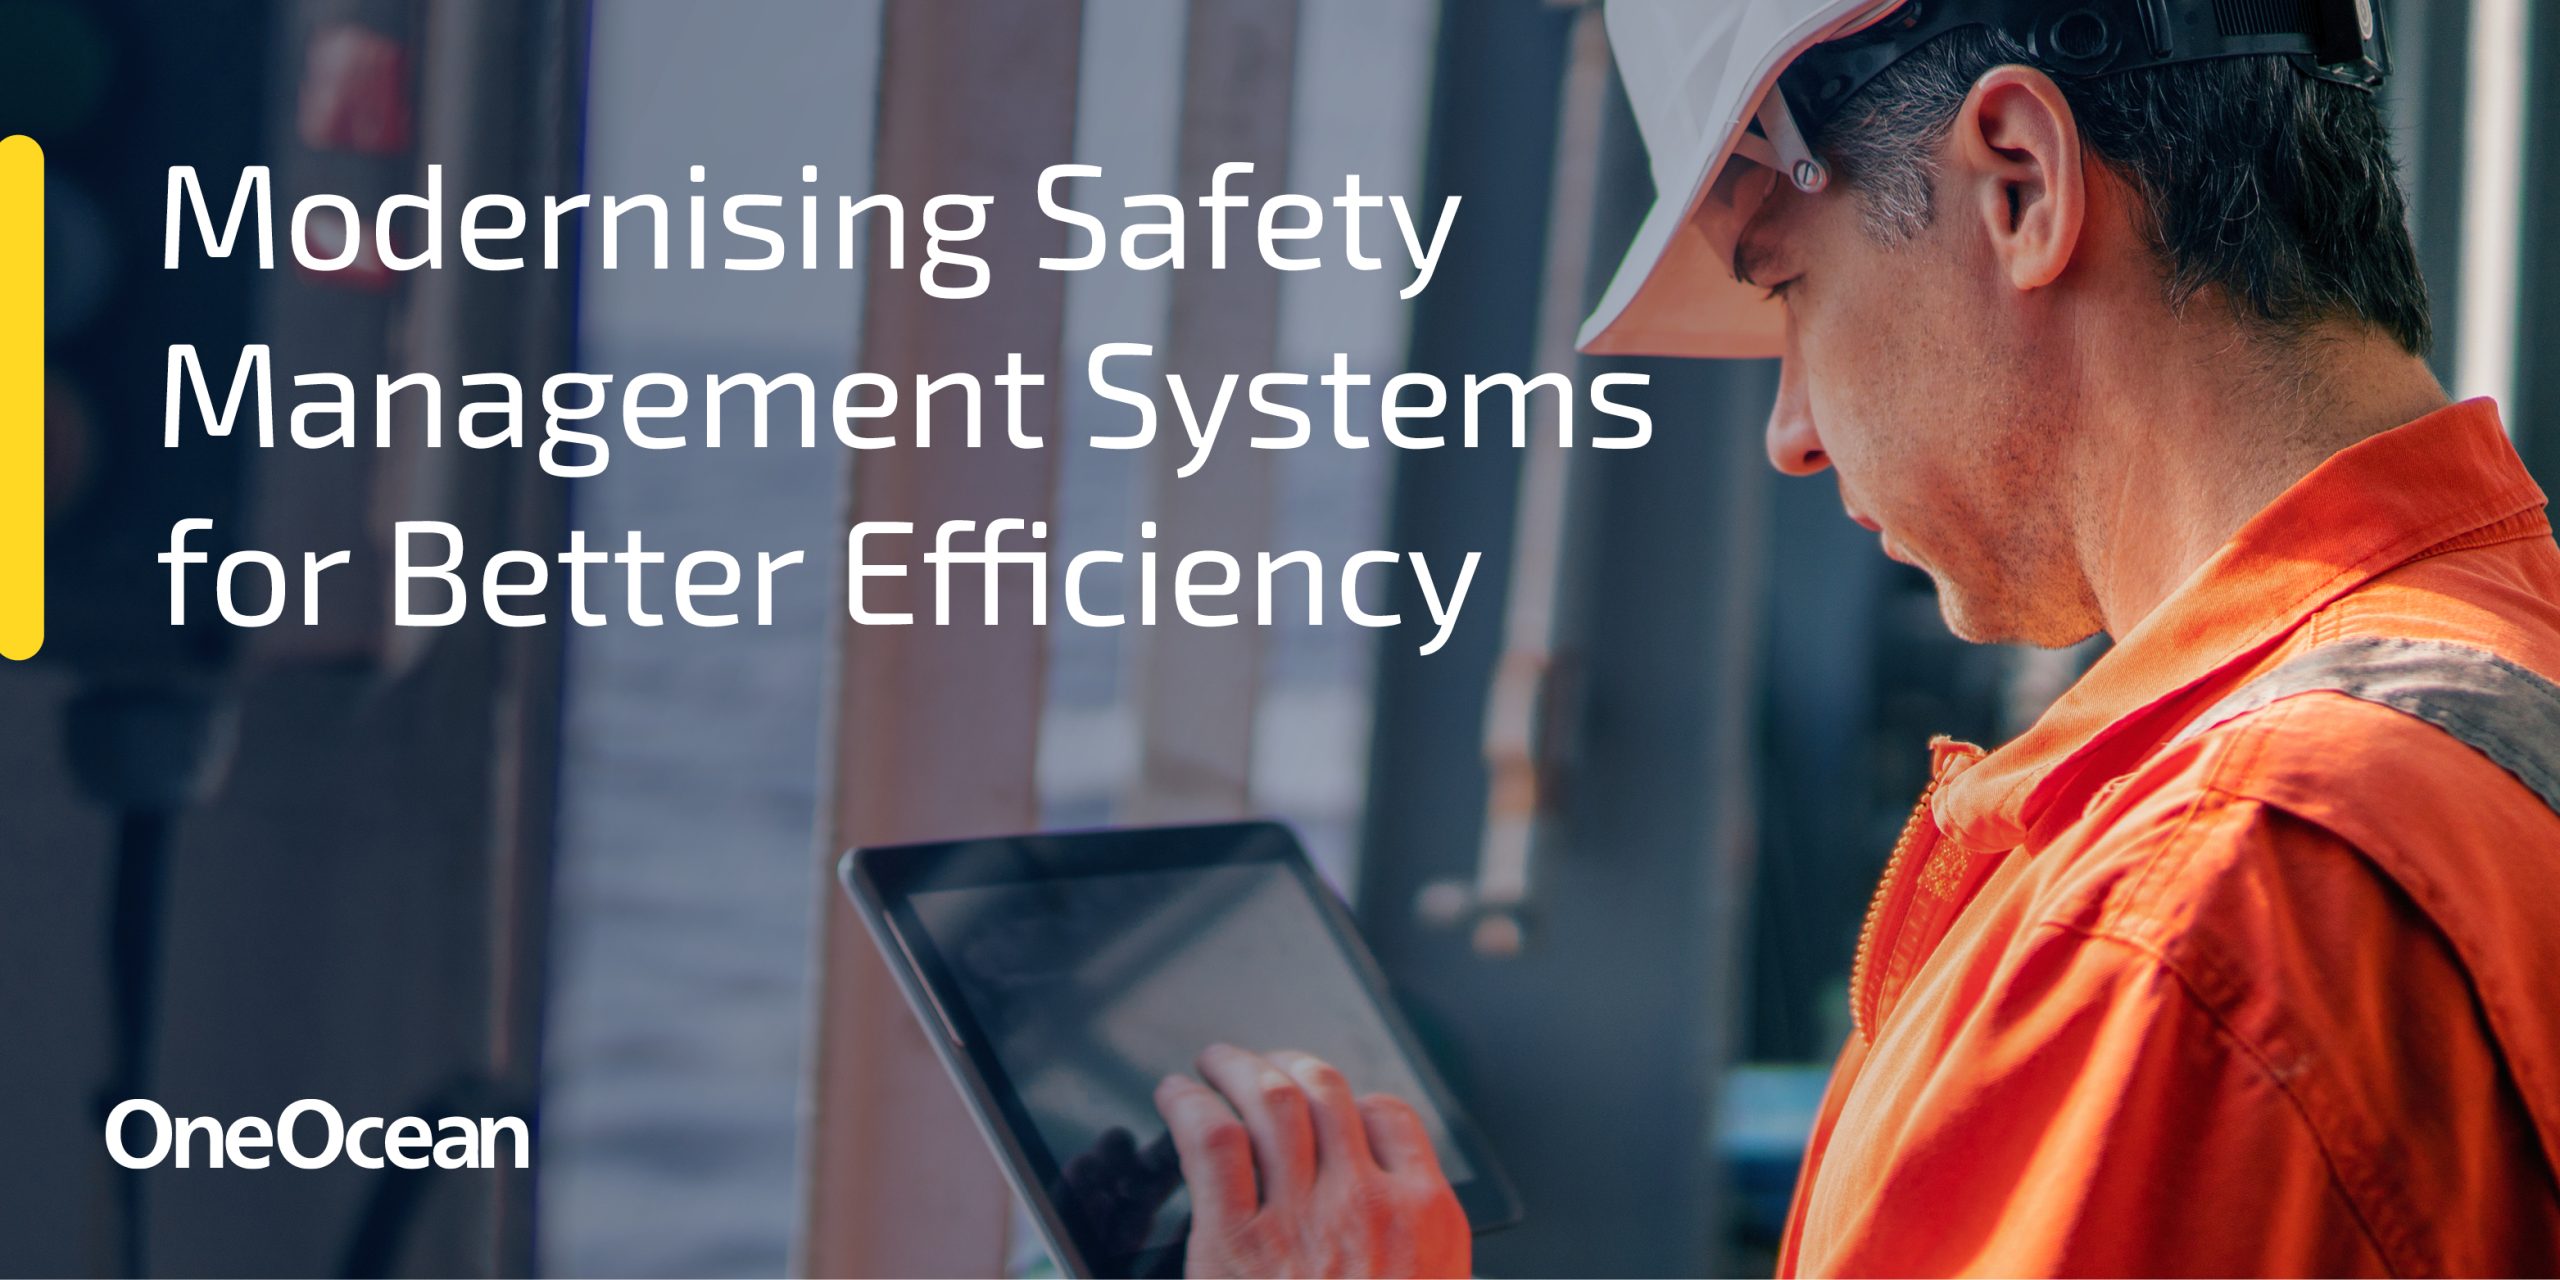 Modernising the handling of Safety Management Systems for better efficiency